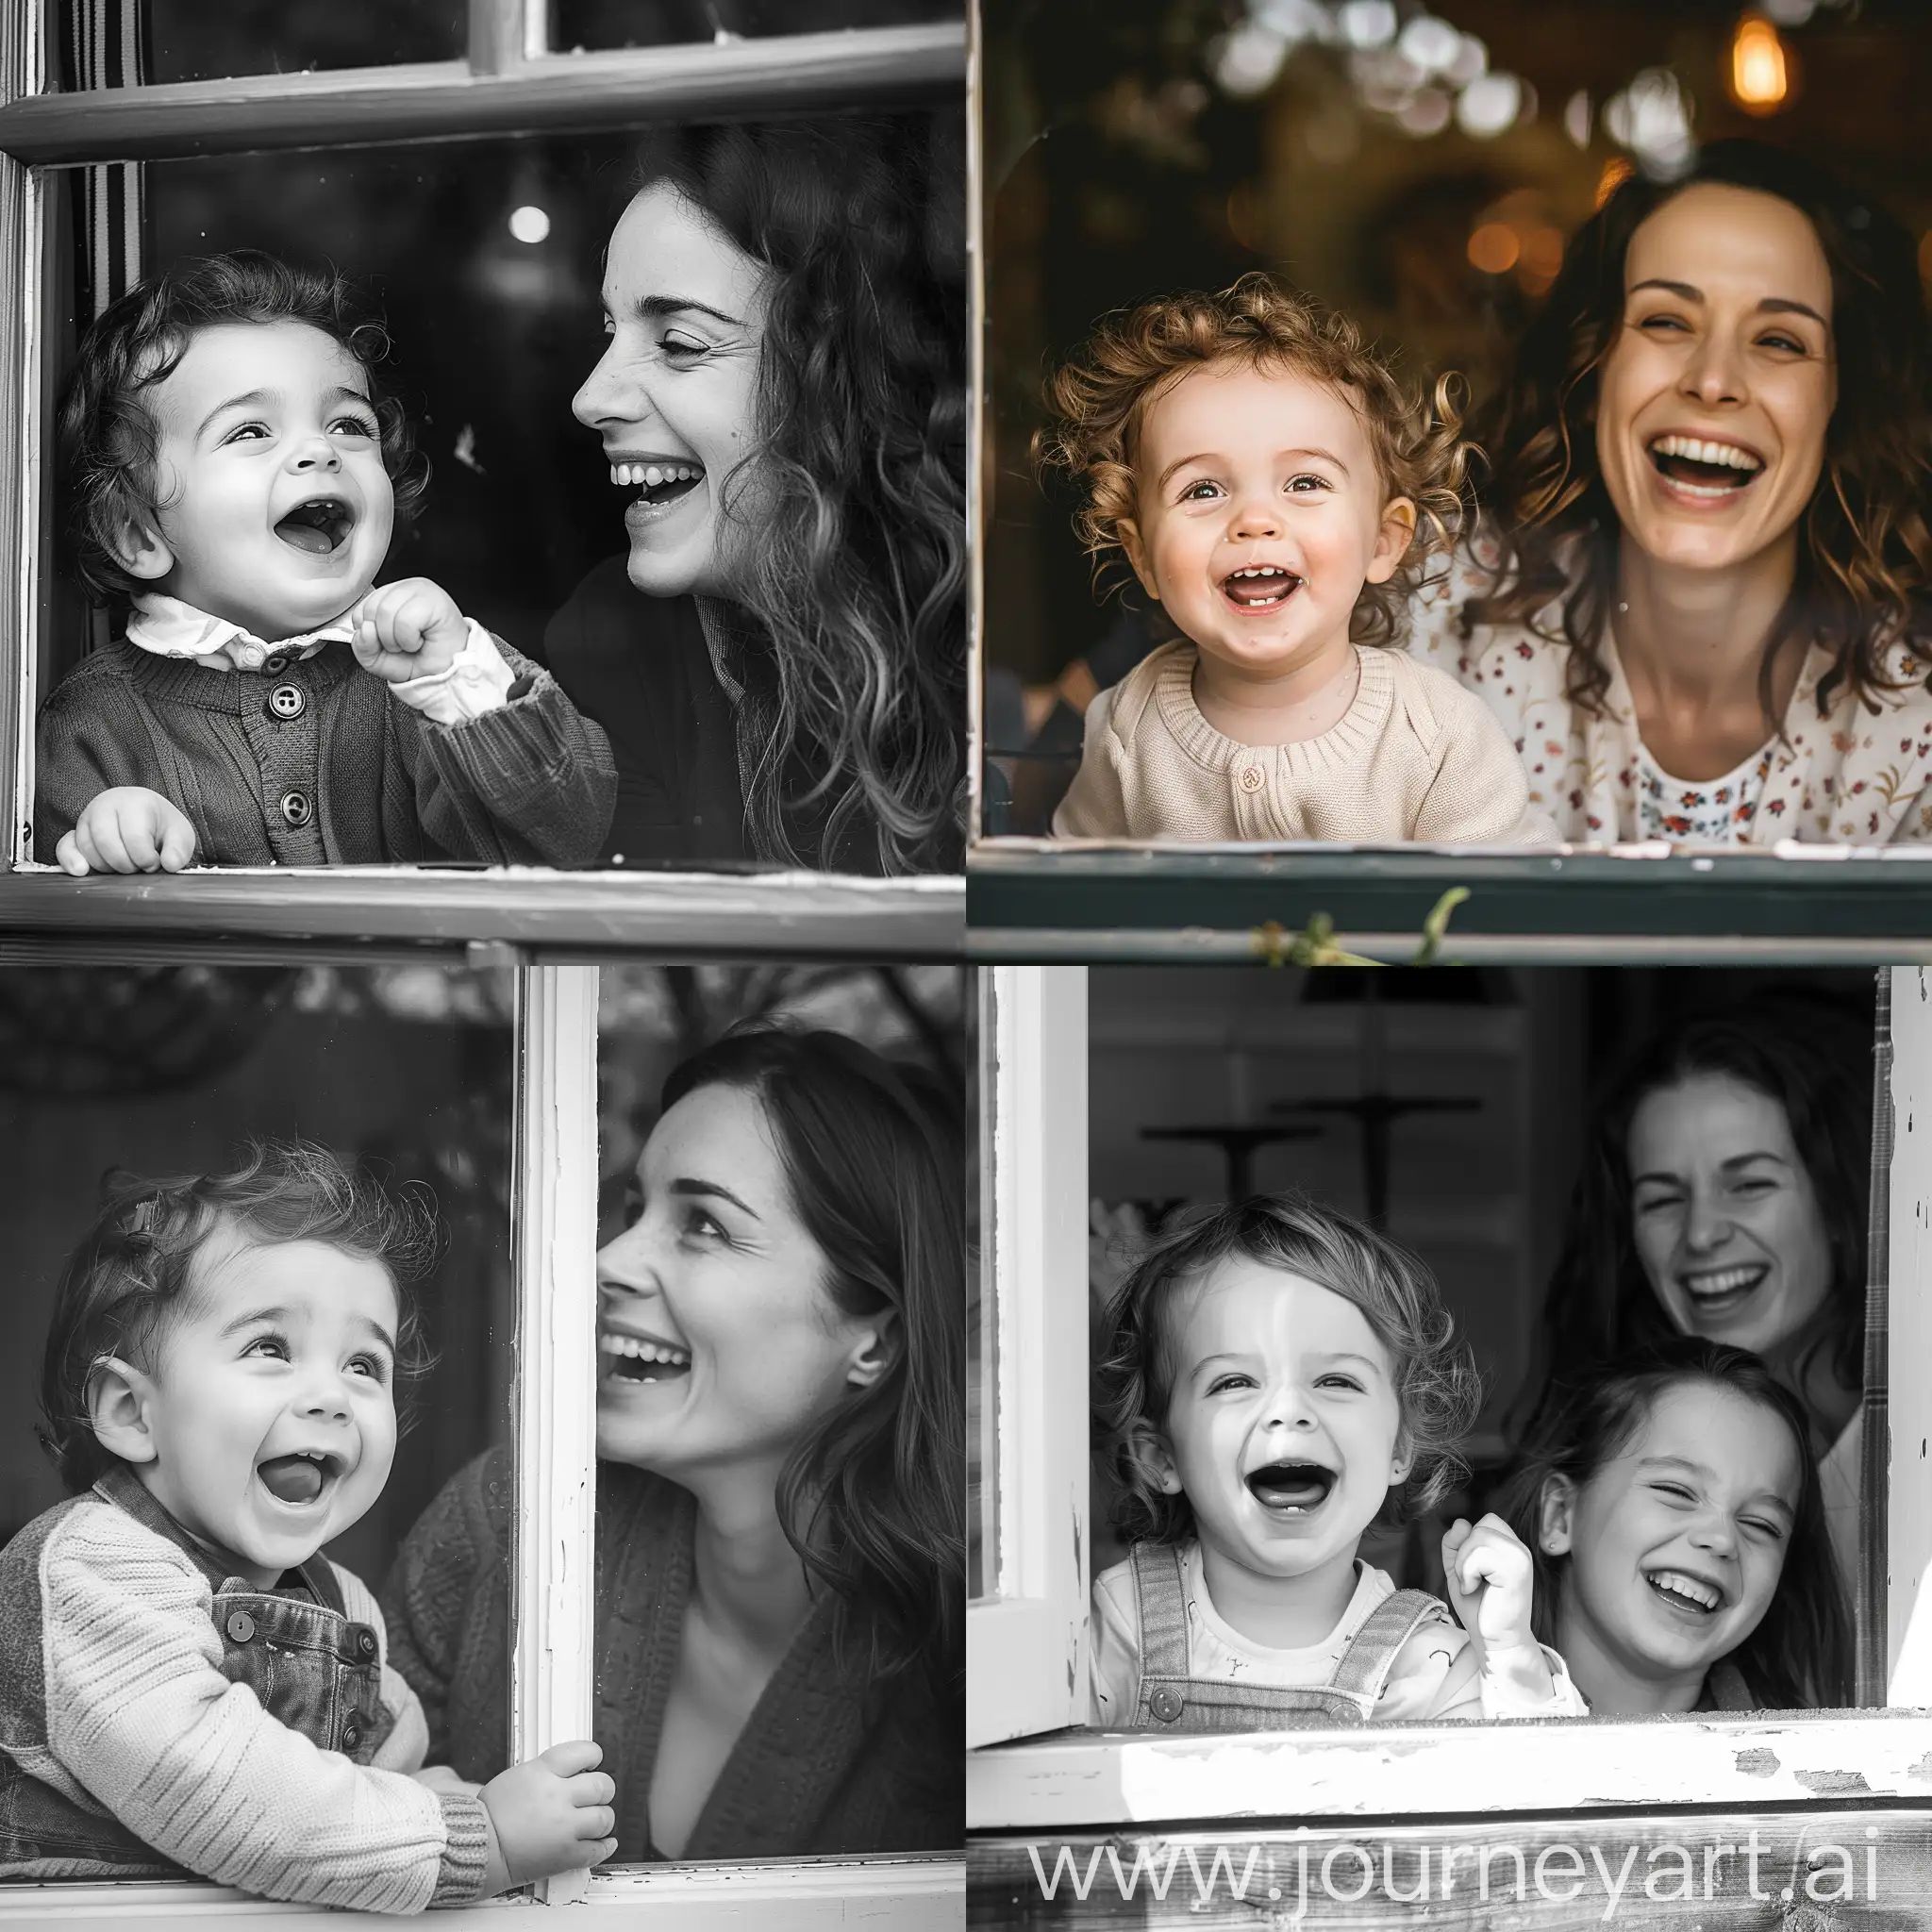 Cheerful-Toddler-Making-Funny-Faces-at-Window-as-Mother-Laughs